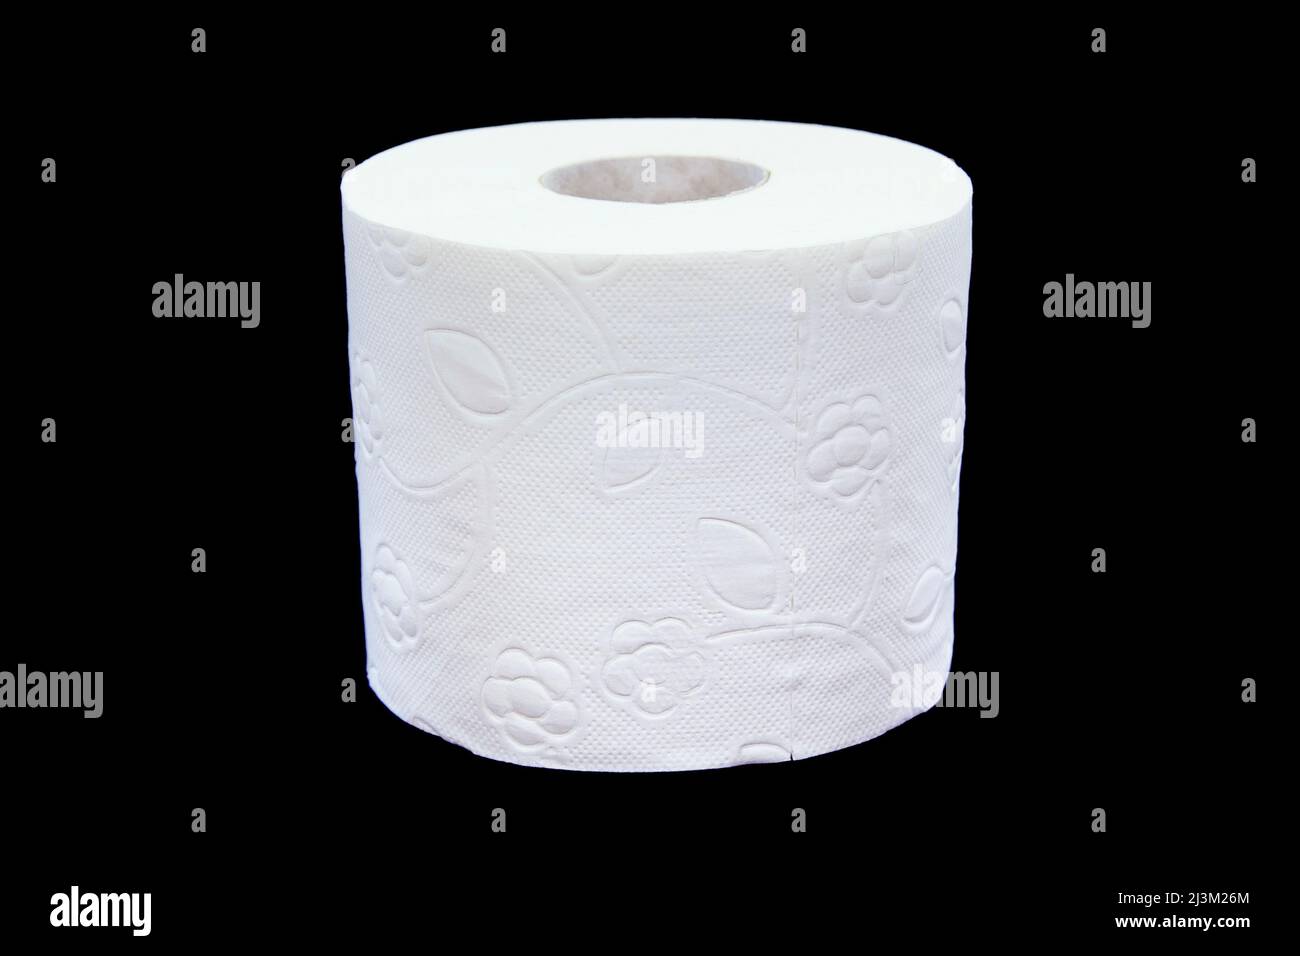 Toilet paper roll on a black background. Presentation of toilet paper roll, isolated on black background. Stock Photo